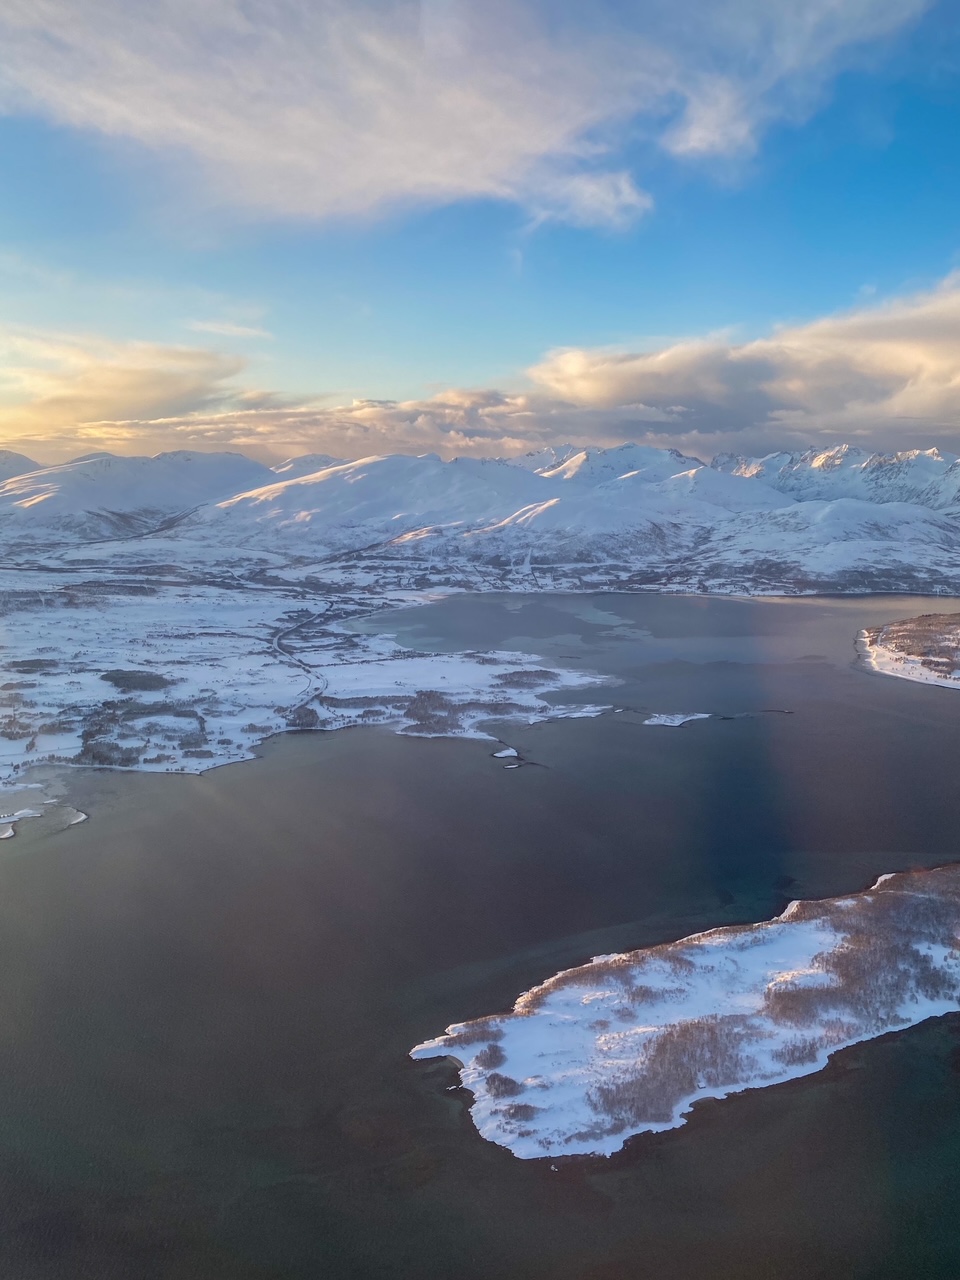 a wintry view on our way from Tromso to Bergen